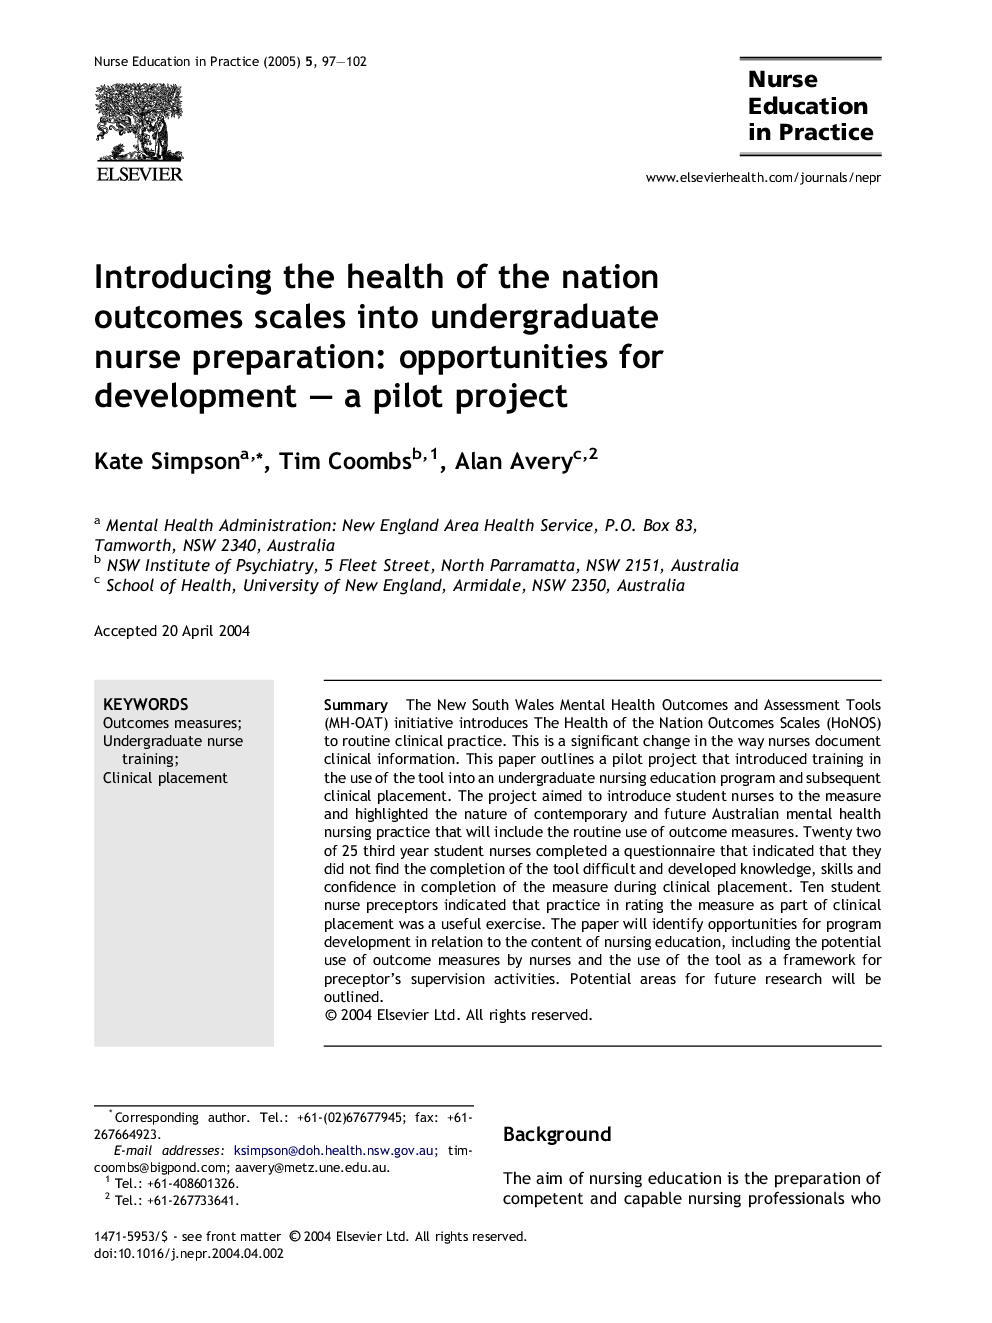 Introducing the health of the nation outcomes scales into undergraduate nurse preparation: opportunities for development - a pilot project